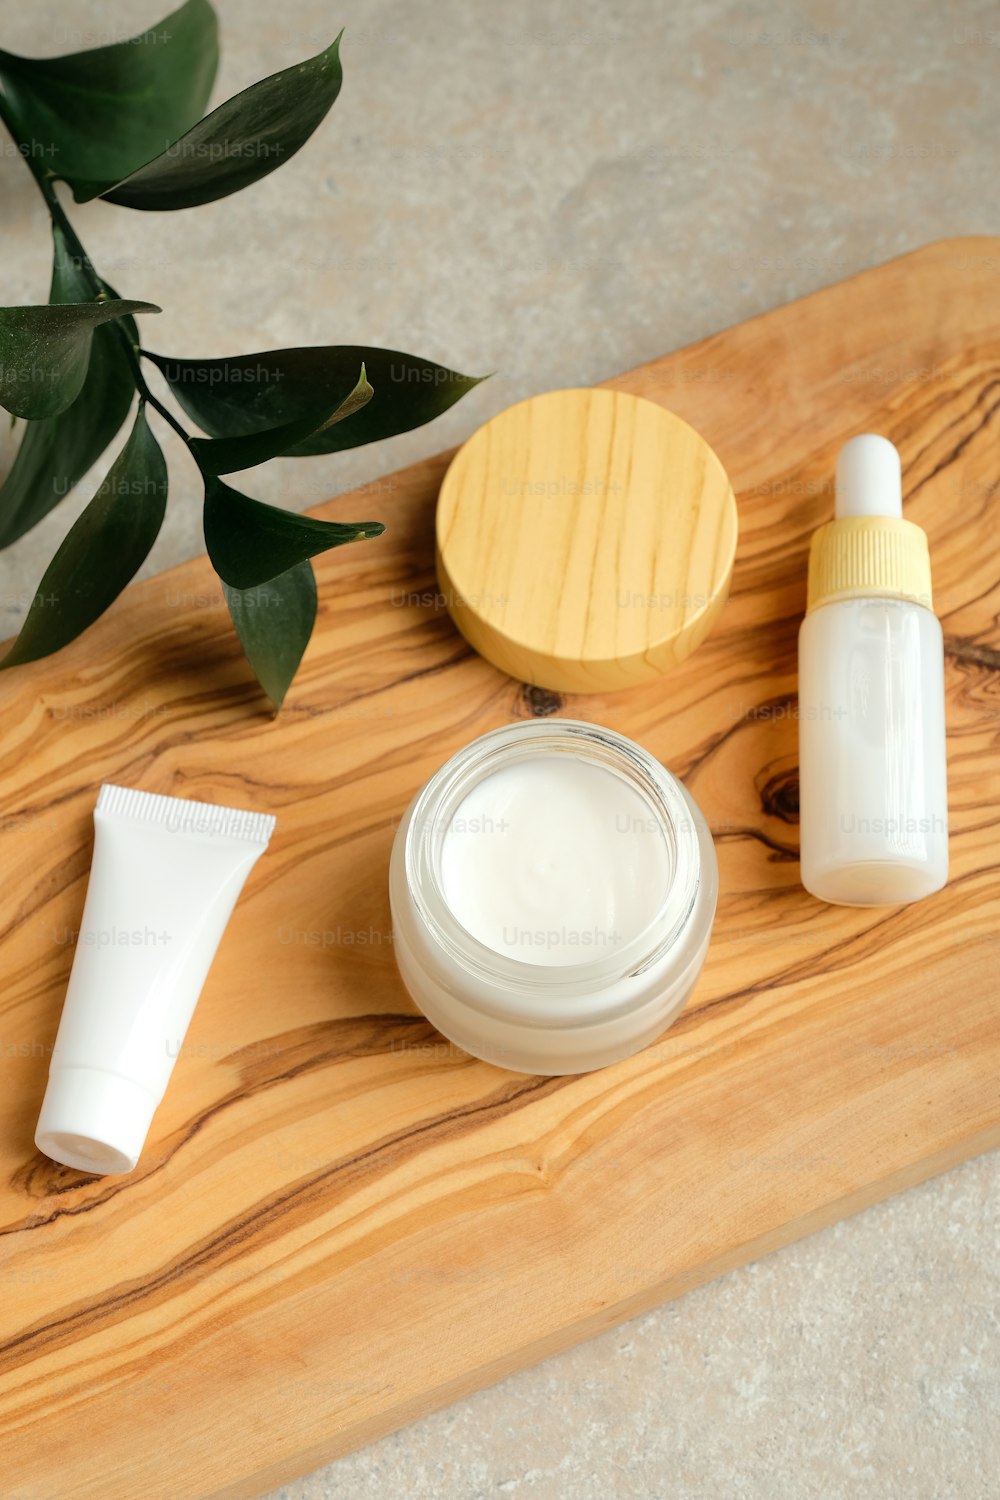 SPA natural organic beauty products set and green leaves on wooden board. Blank white cosmetics plastic tube, jar of body cream, serum. Packaging design, branding.